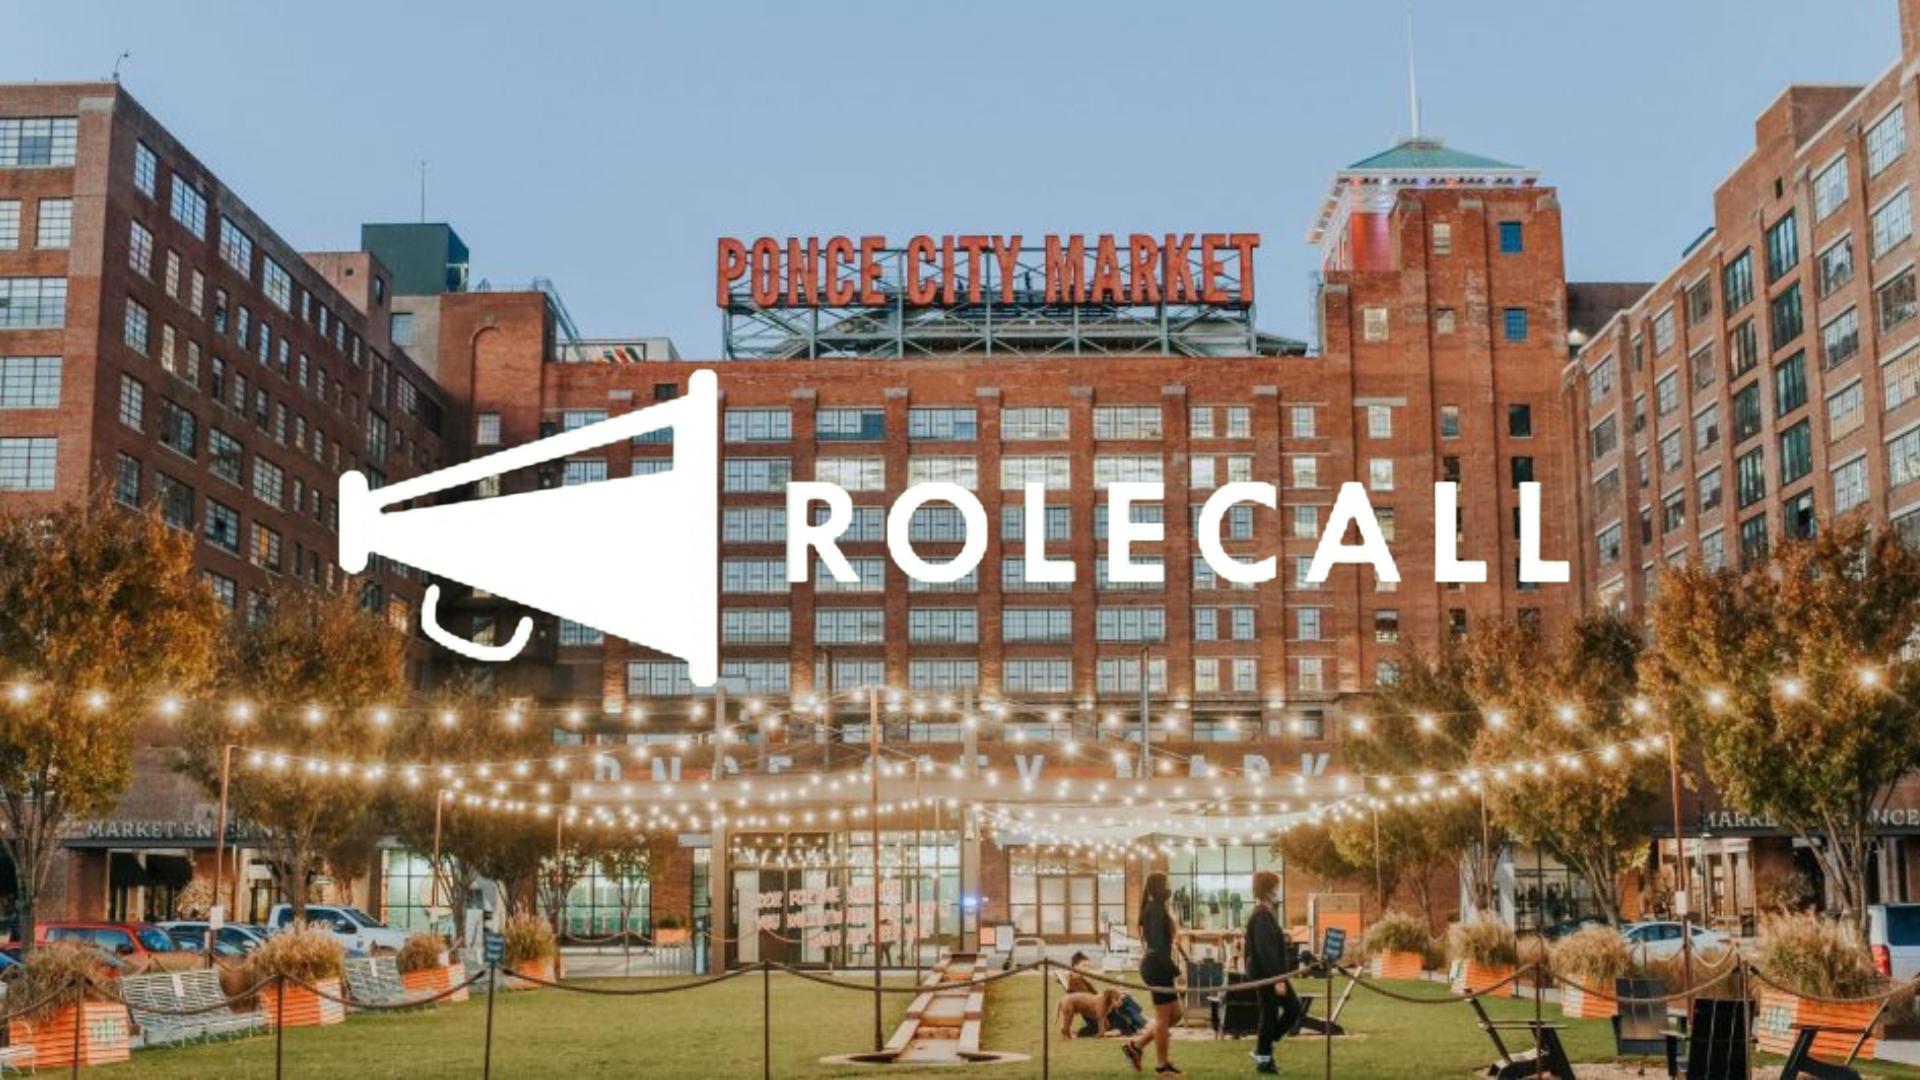 RoleCall Theatre/Ponce City Market